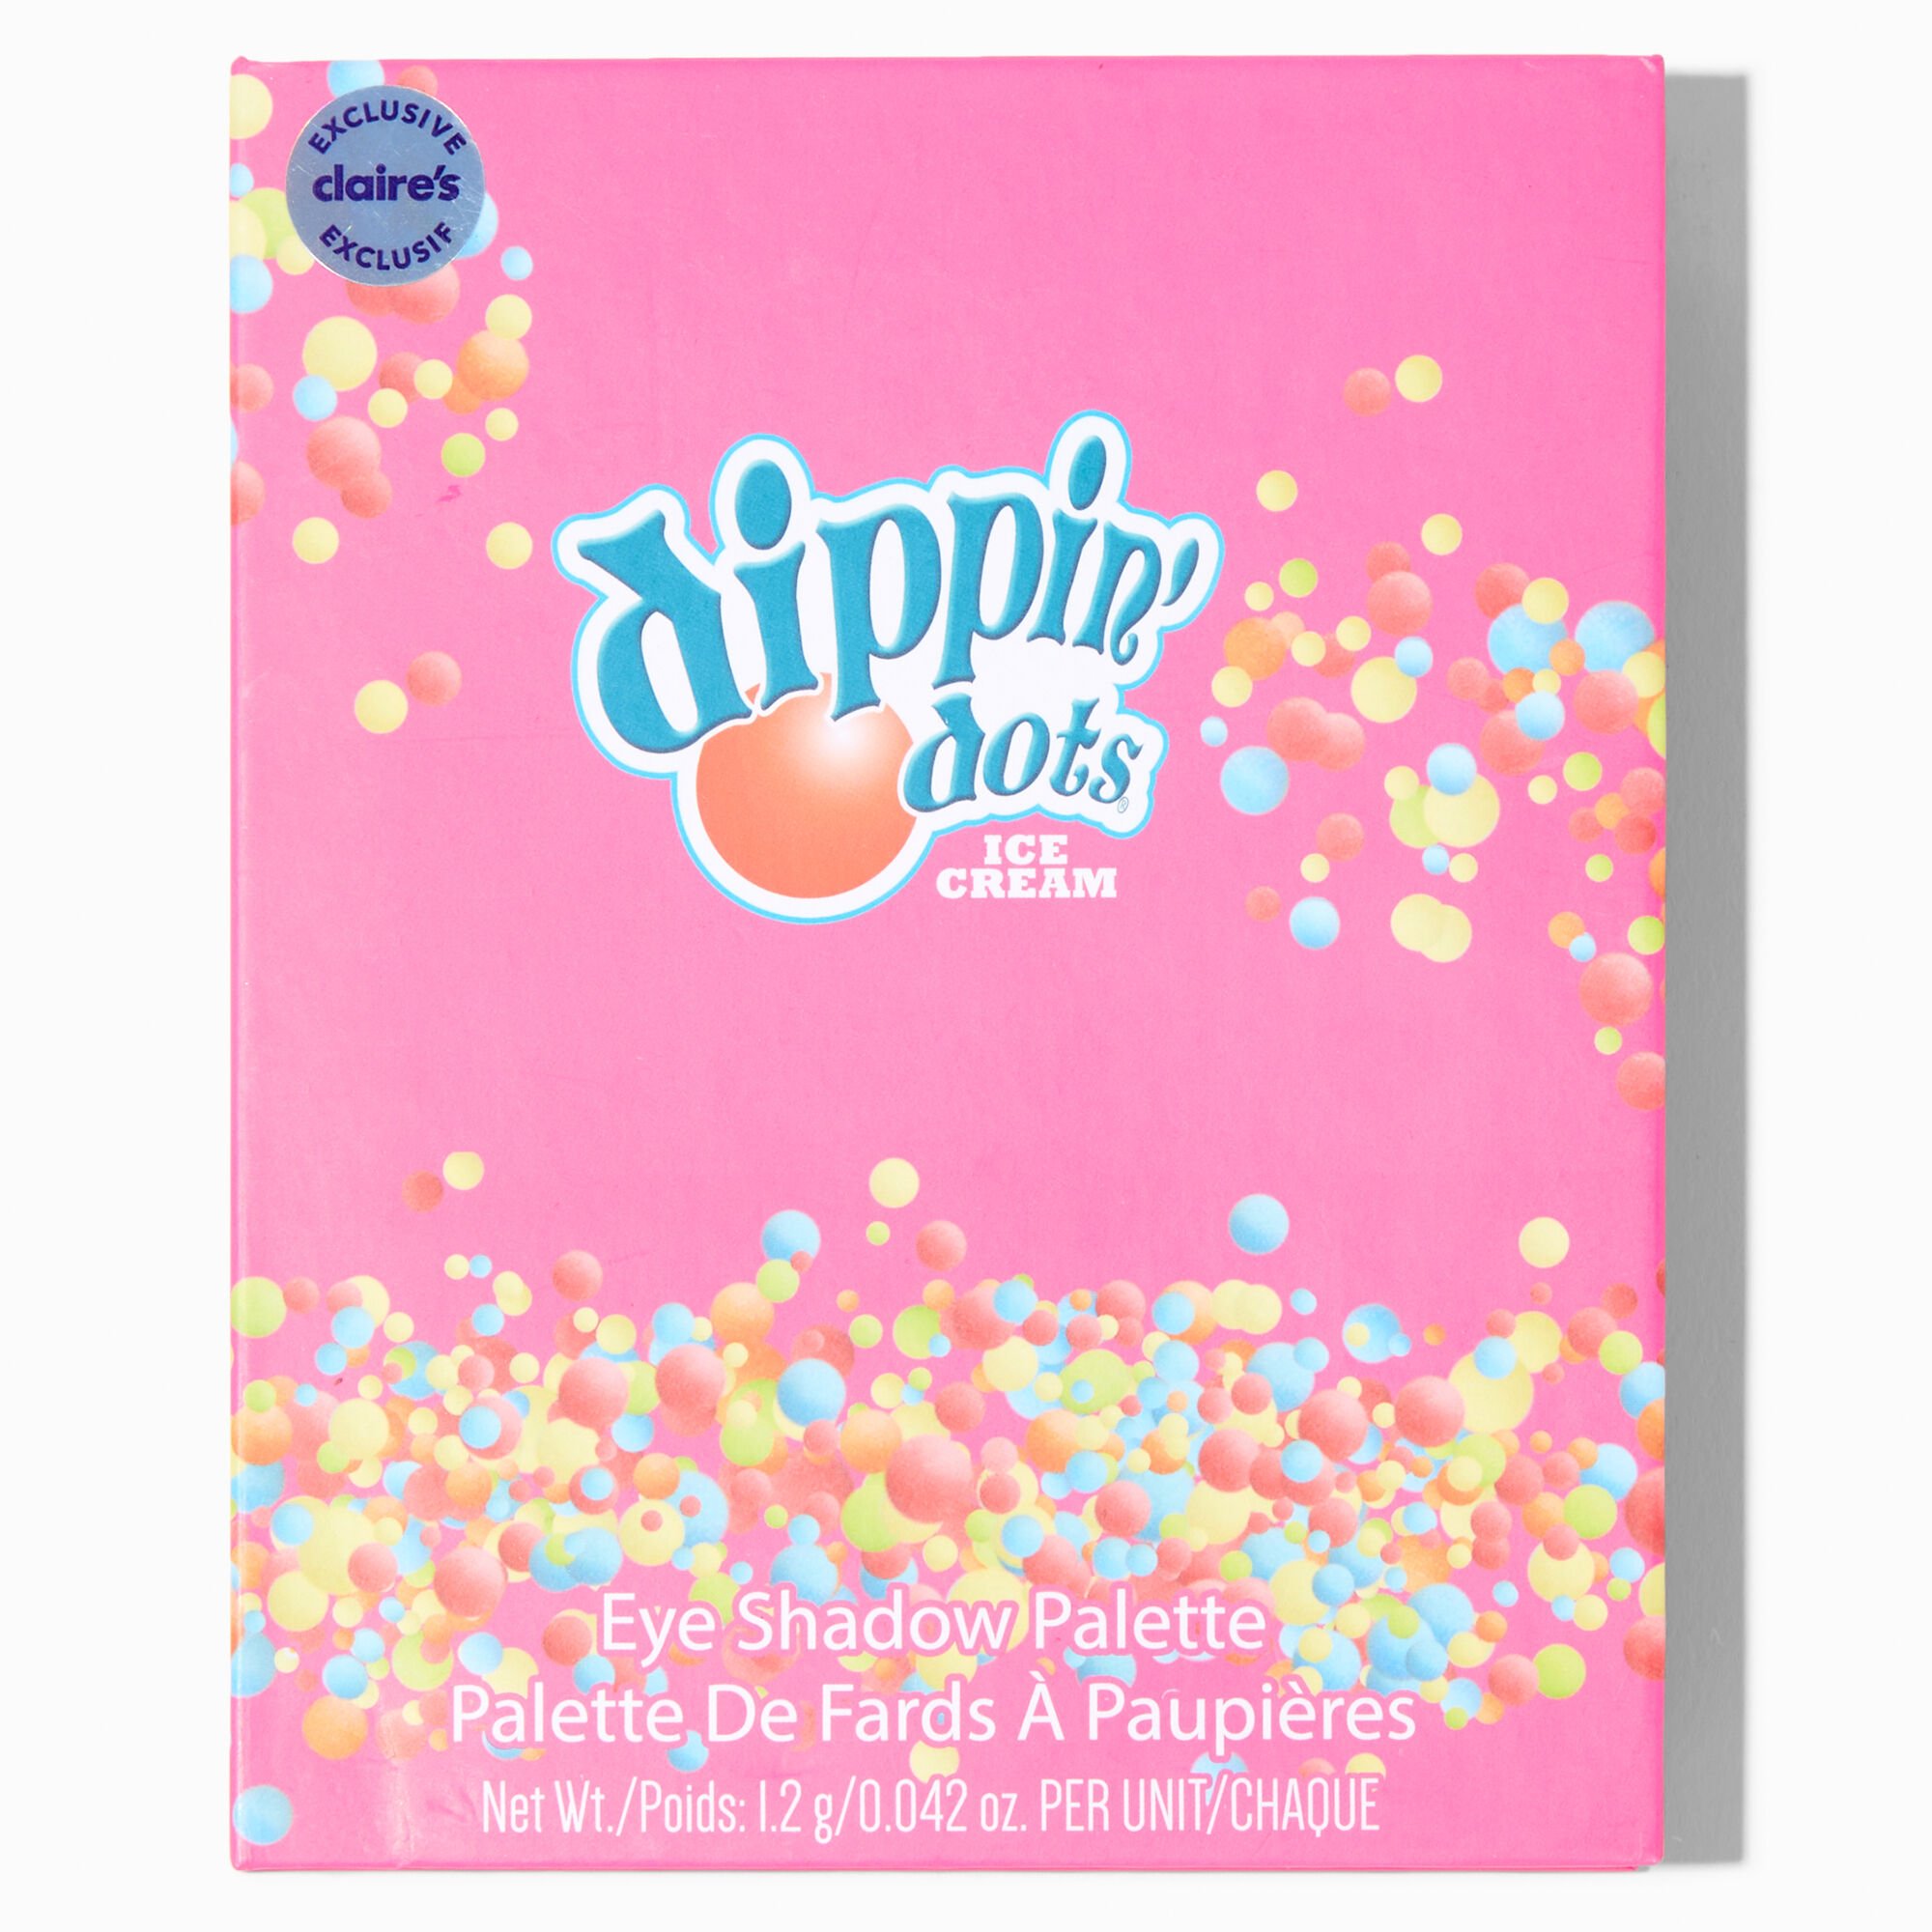 View Dippin Dots Claires Exclusive Eyeshadow Palette information